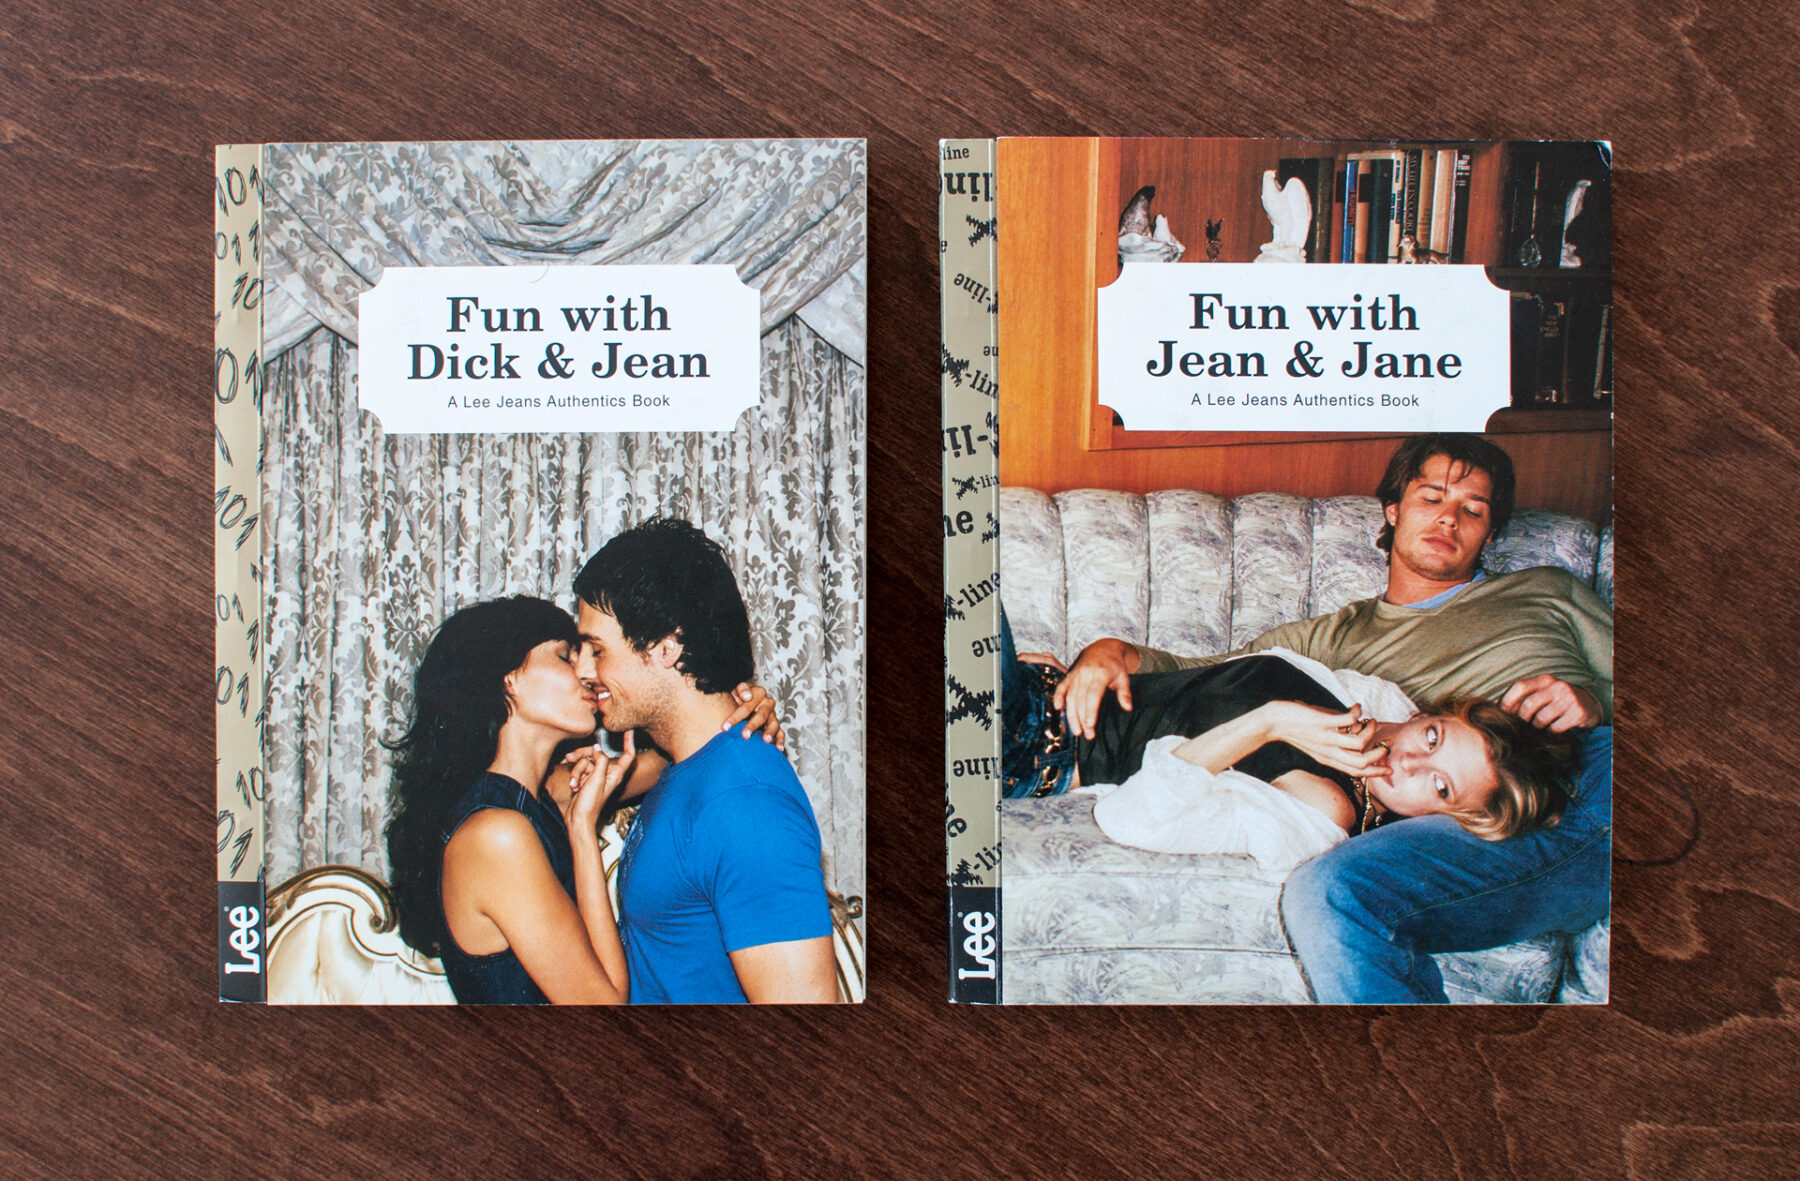 Lee Jeans – Fun with Dick & Jean